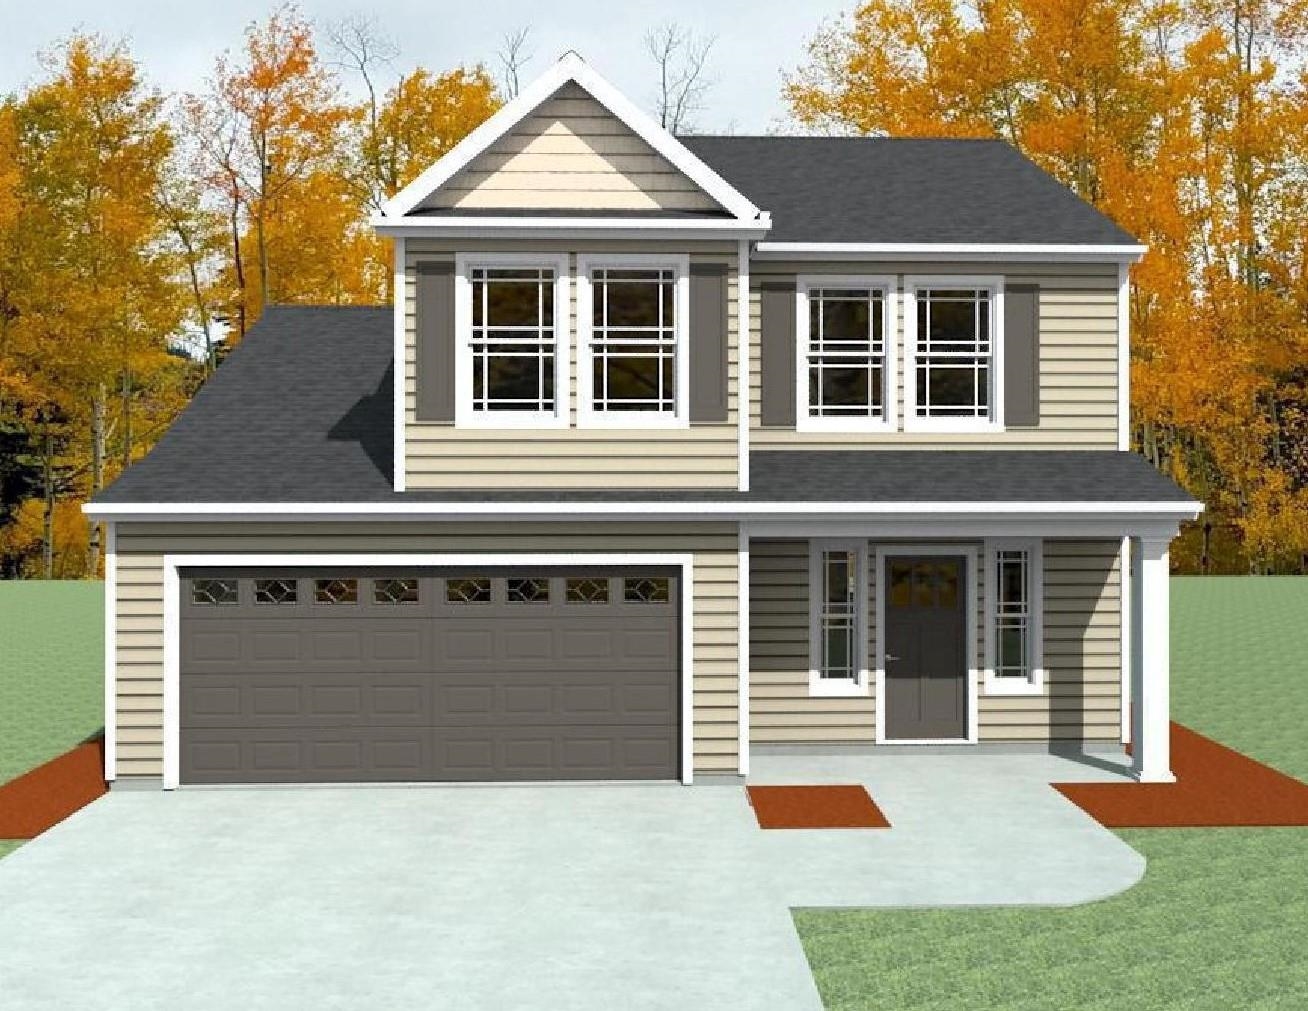 This is the REYNOLDS floorplan with an open living space downstairs, all bedrooms are located upstairs, 3 bedrooms and 2 1/2 bathrooms, granite countertops, gas fireplace, and a 12x12 back patio. Located in the NEW Elliott Park community in Lyman just minutes from Spartanburg and Greenville. Call today for more info!